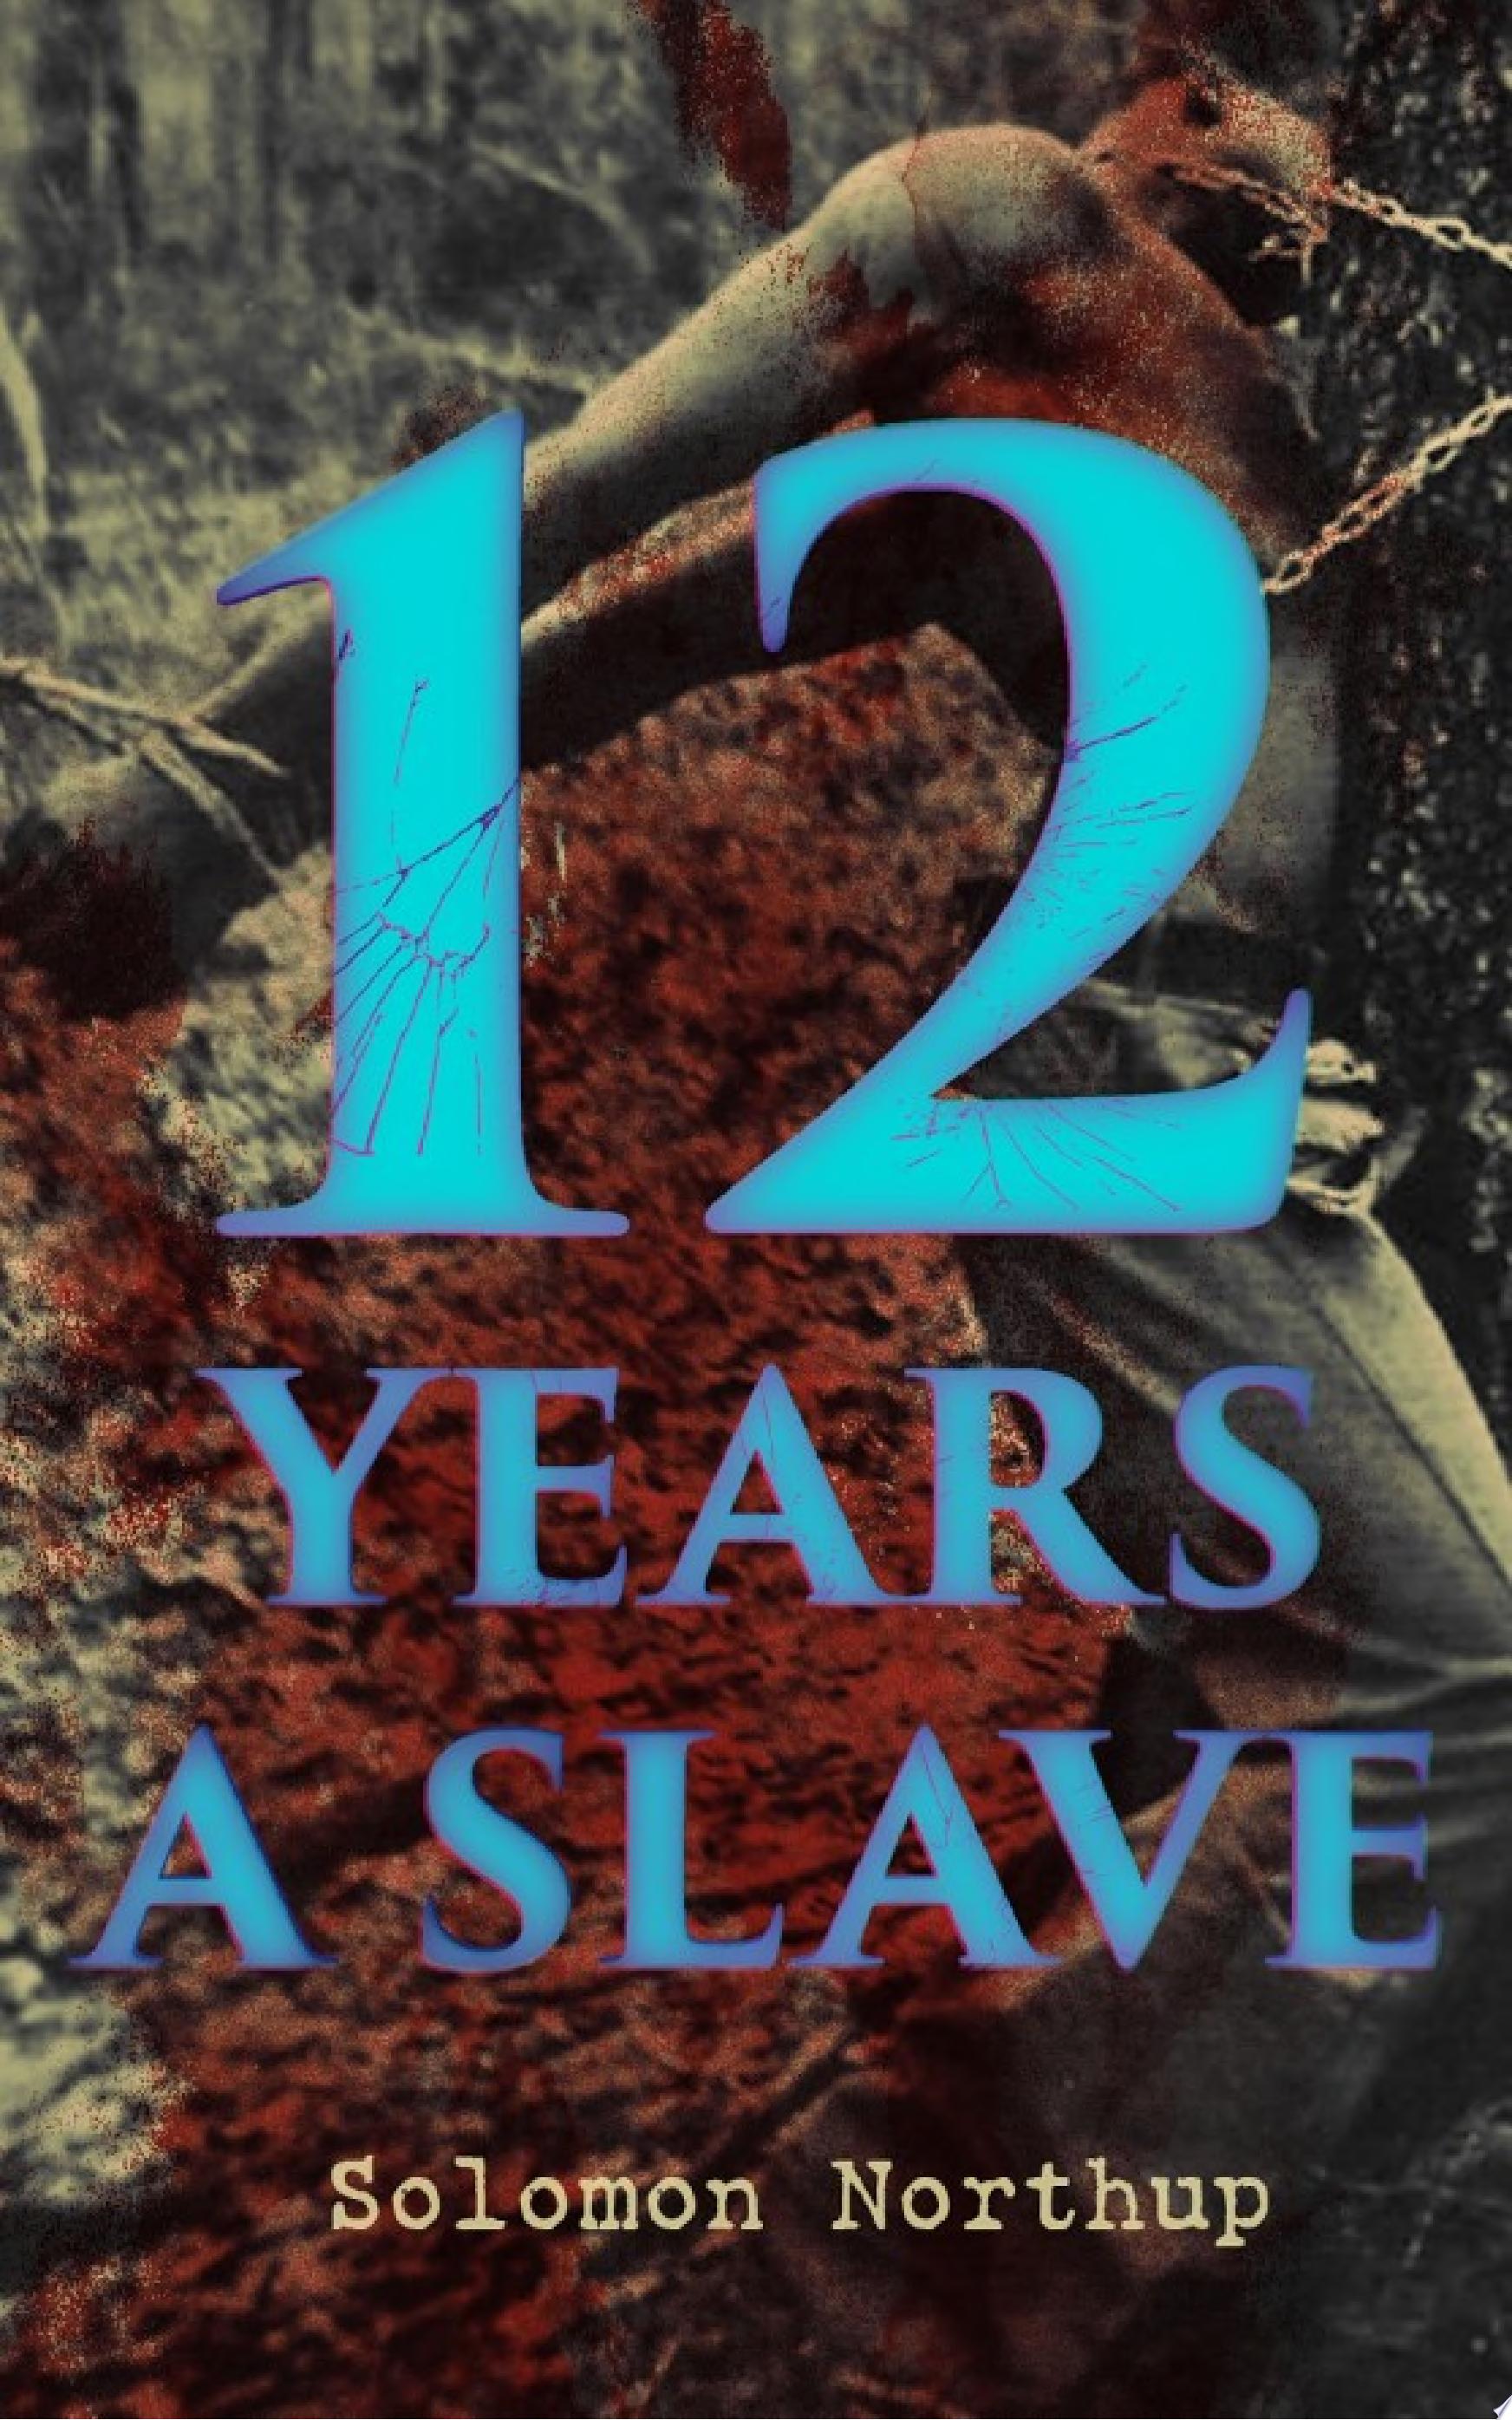 Image for "12 Years A Slave"